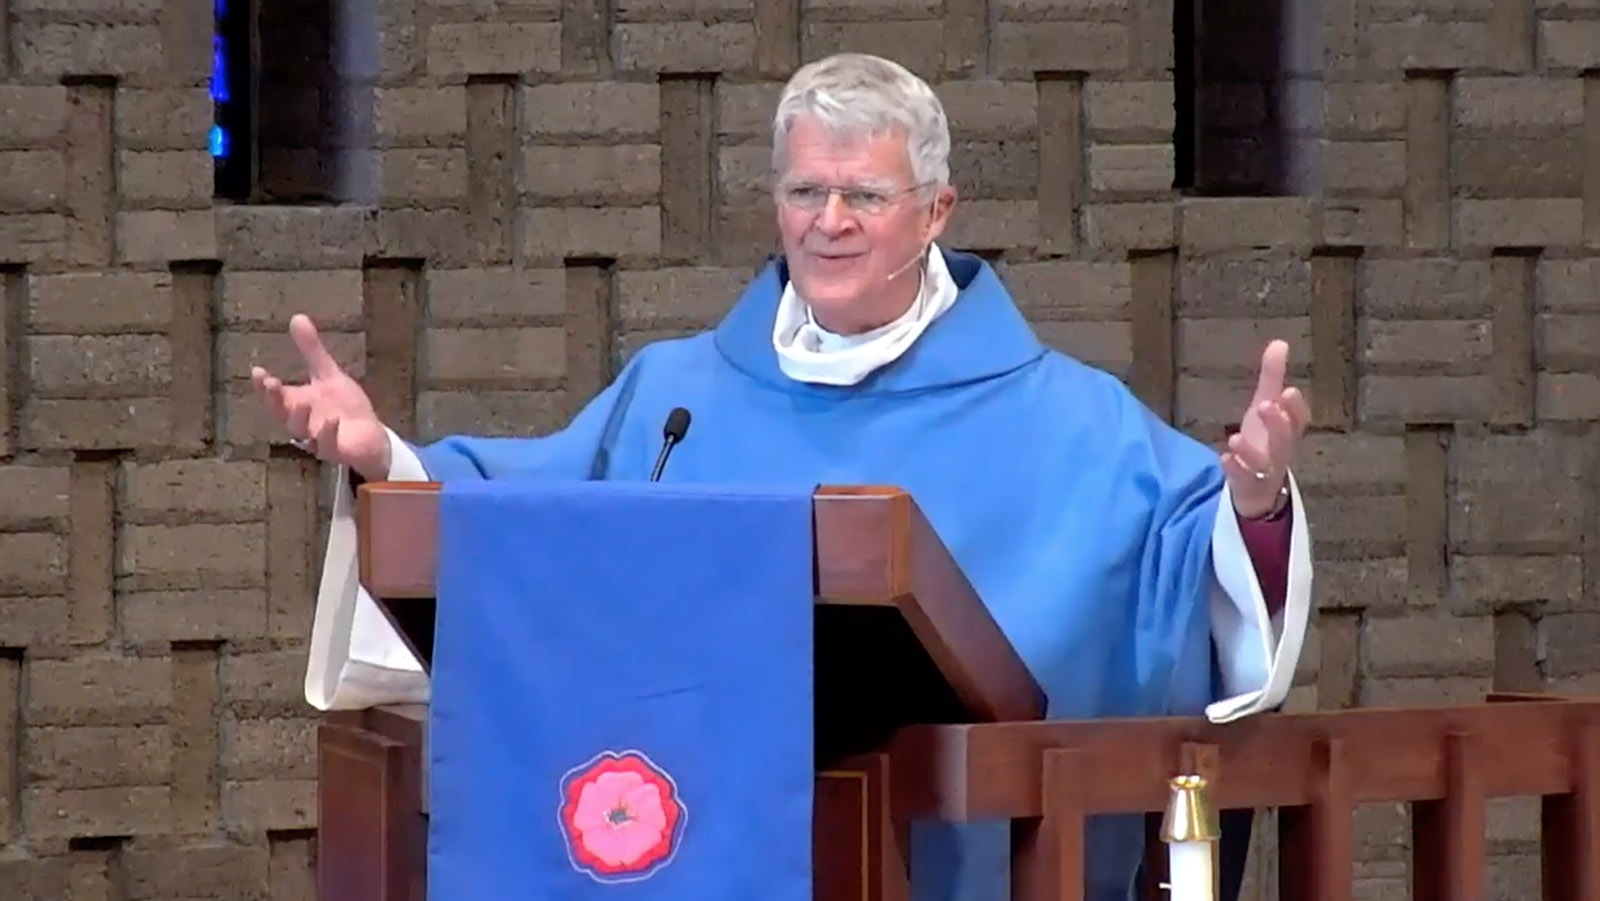 The Most Rev. Frank T. Griswold III in 2019. (Video screen grab)